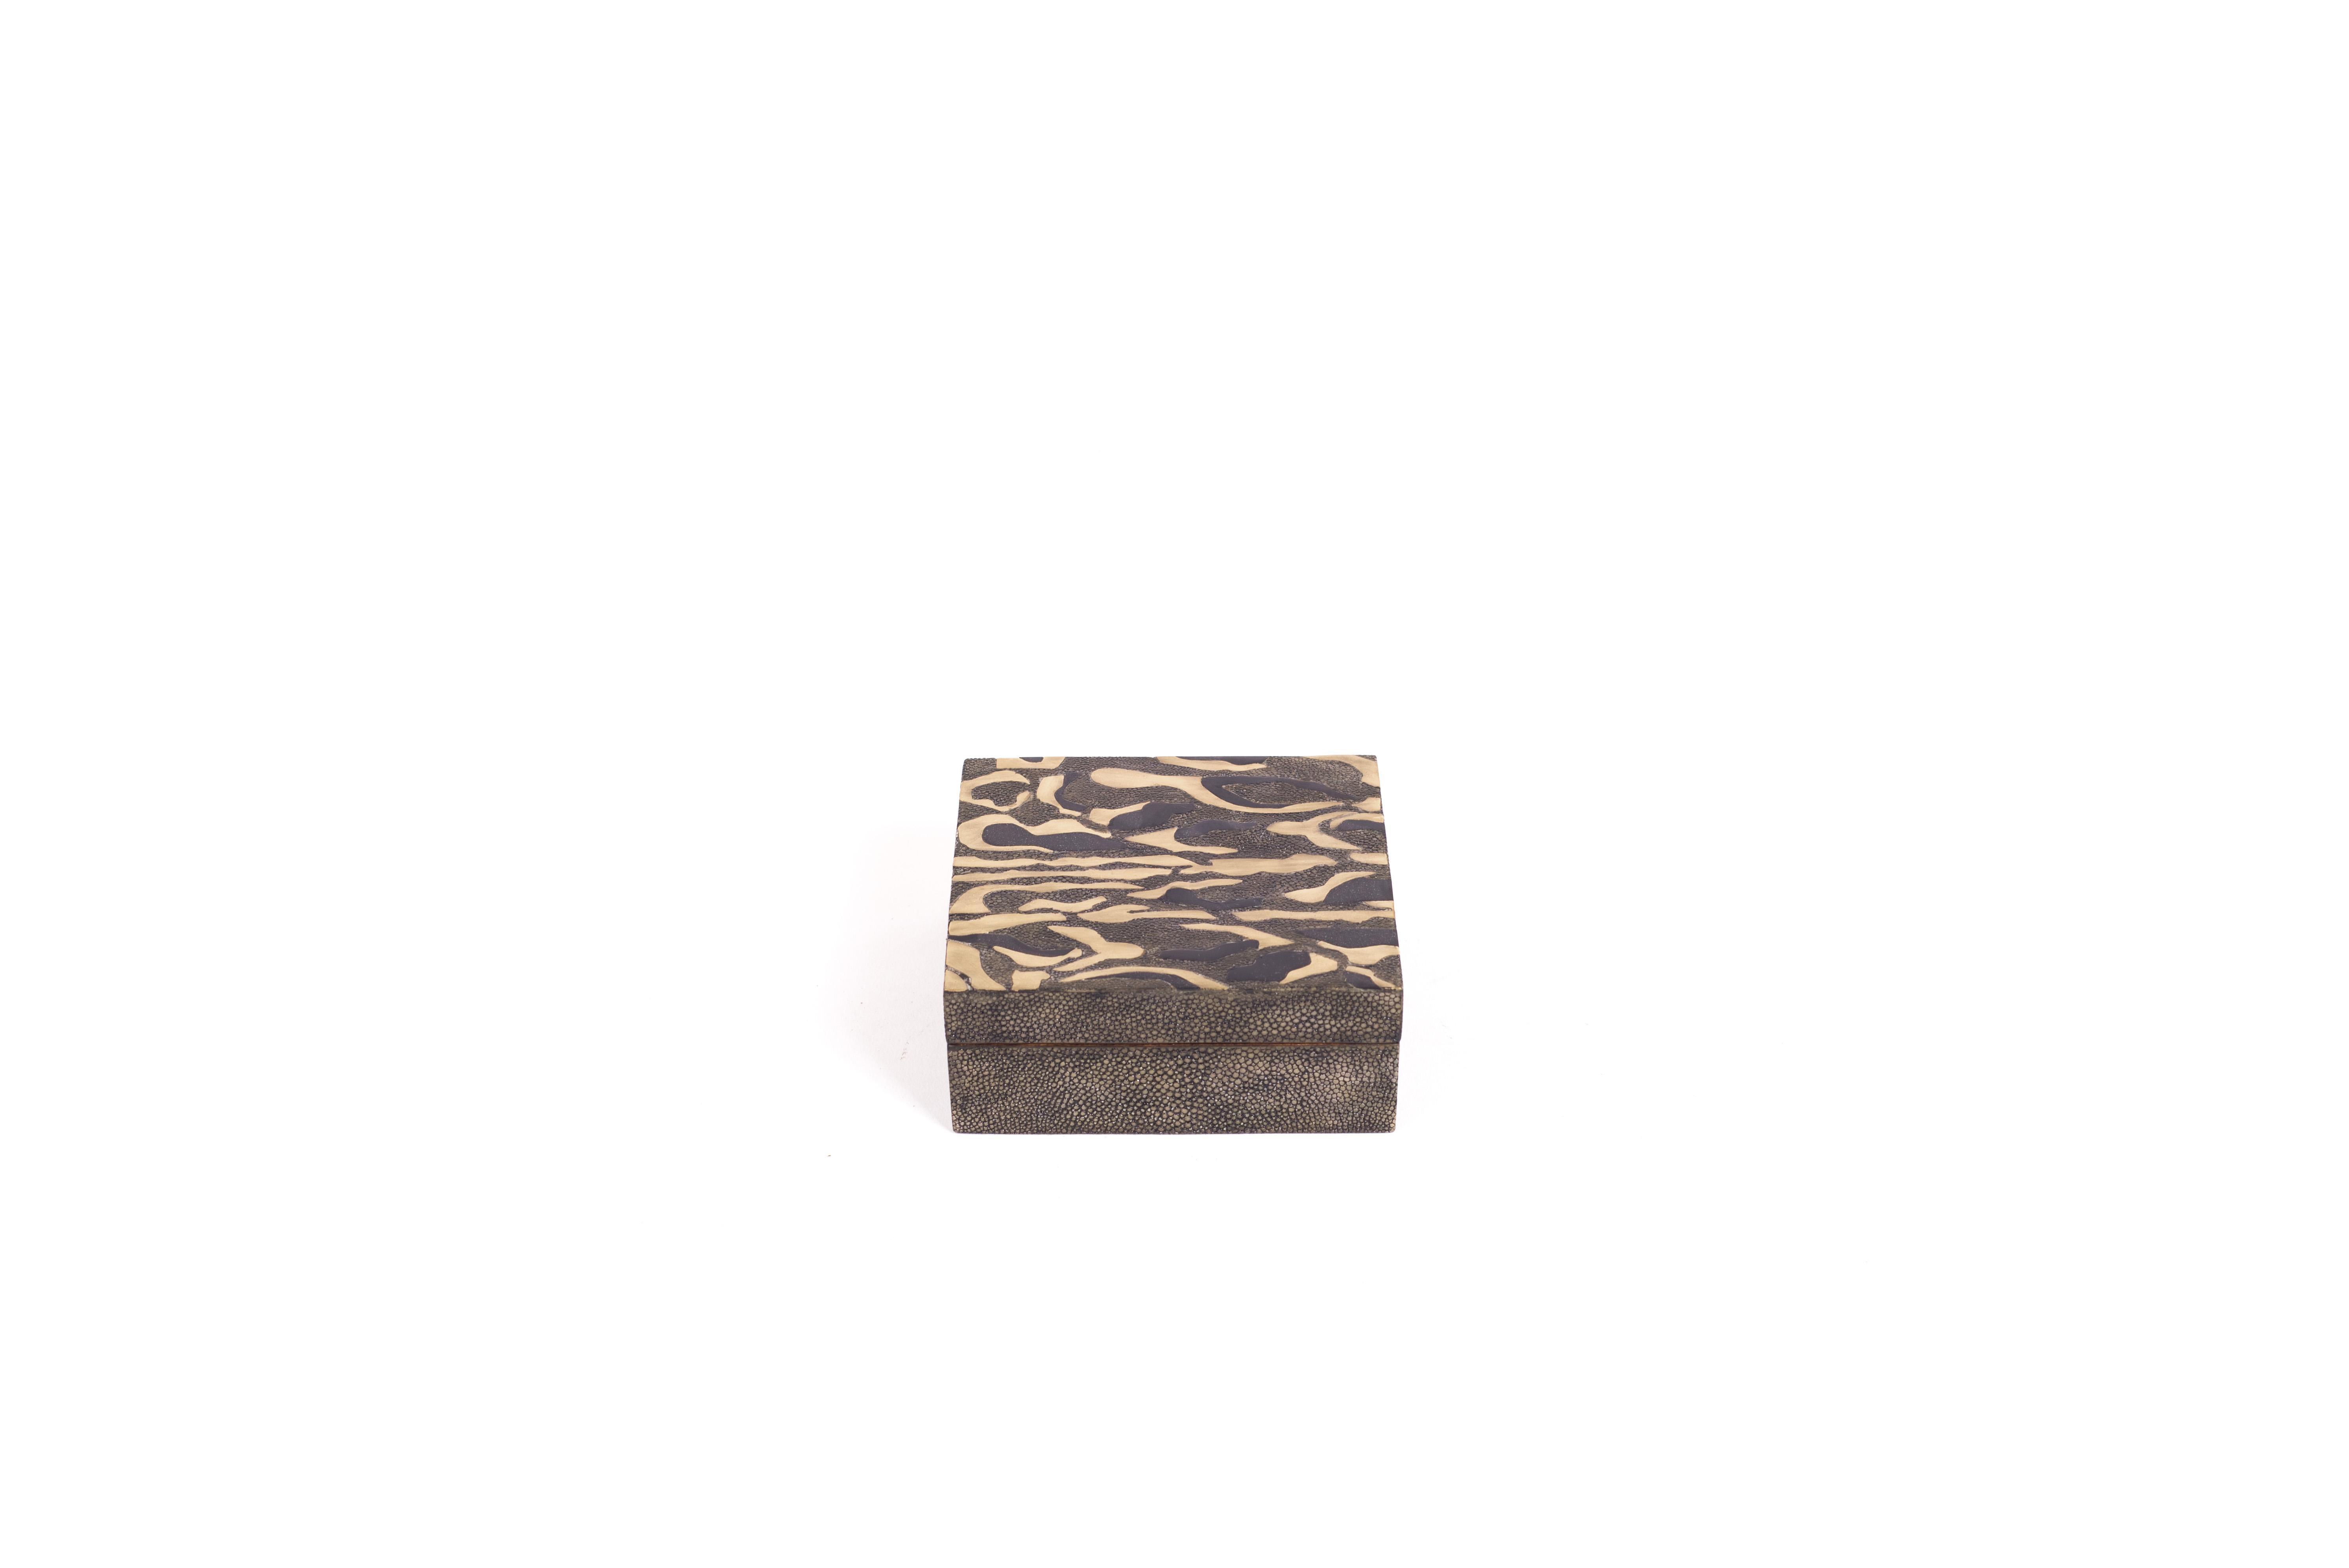 Hand-Crafted Shagreen Leopard Pattern Box with Shell and Brass Details by Kifu Paris For Sale